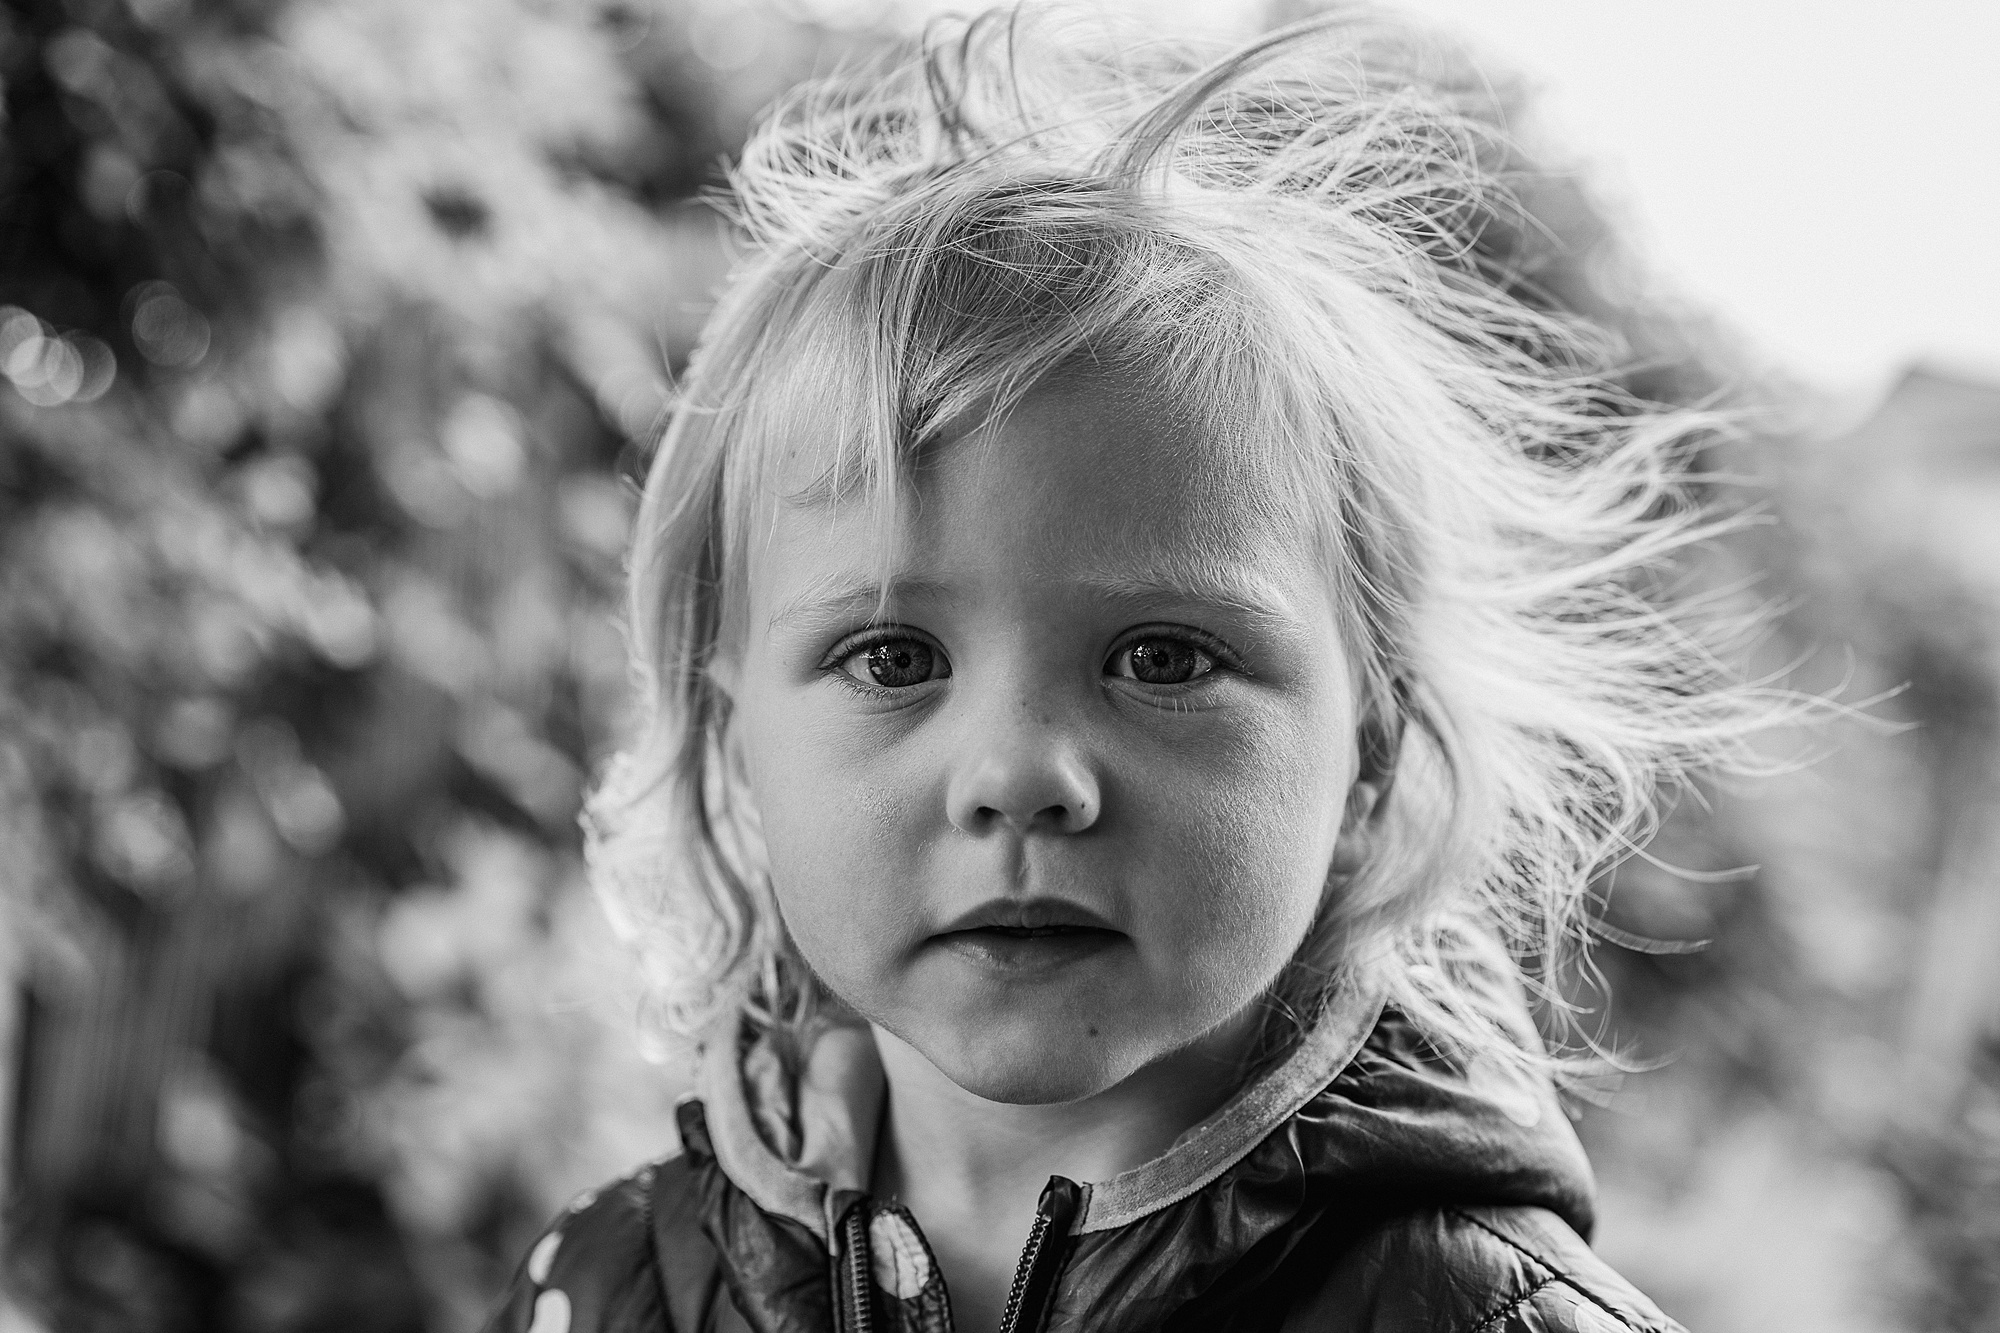 Natural black and white portrait of a little girl with hair blowing in the wind